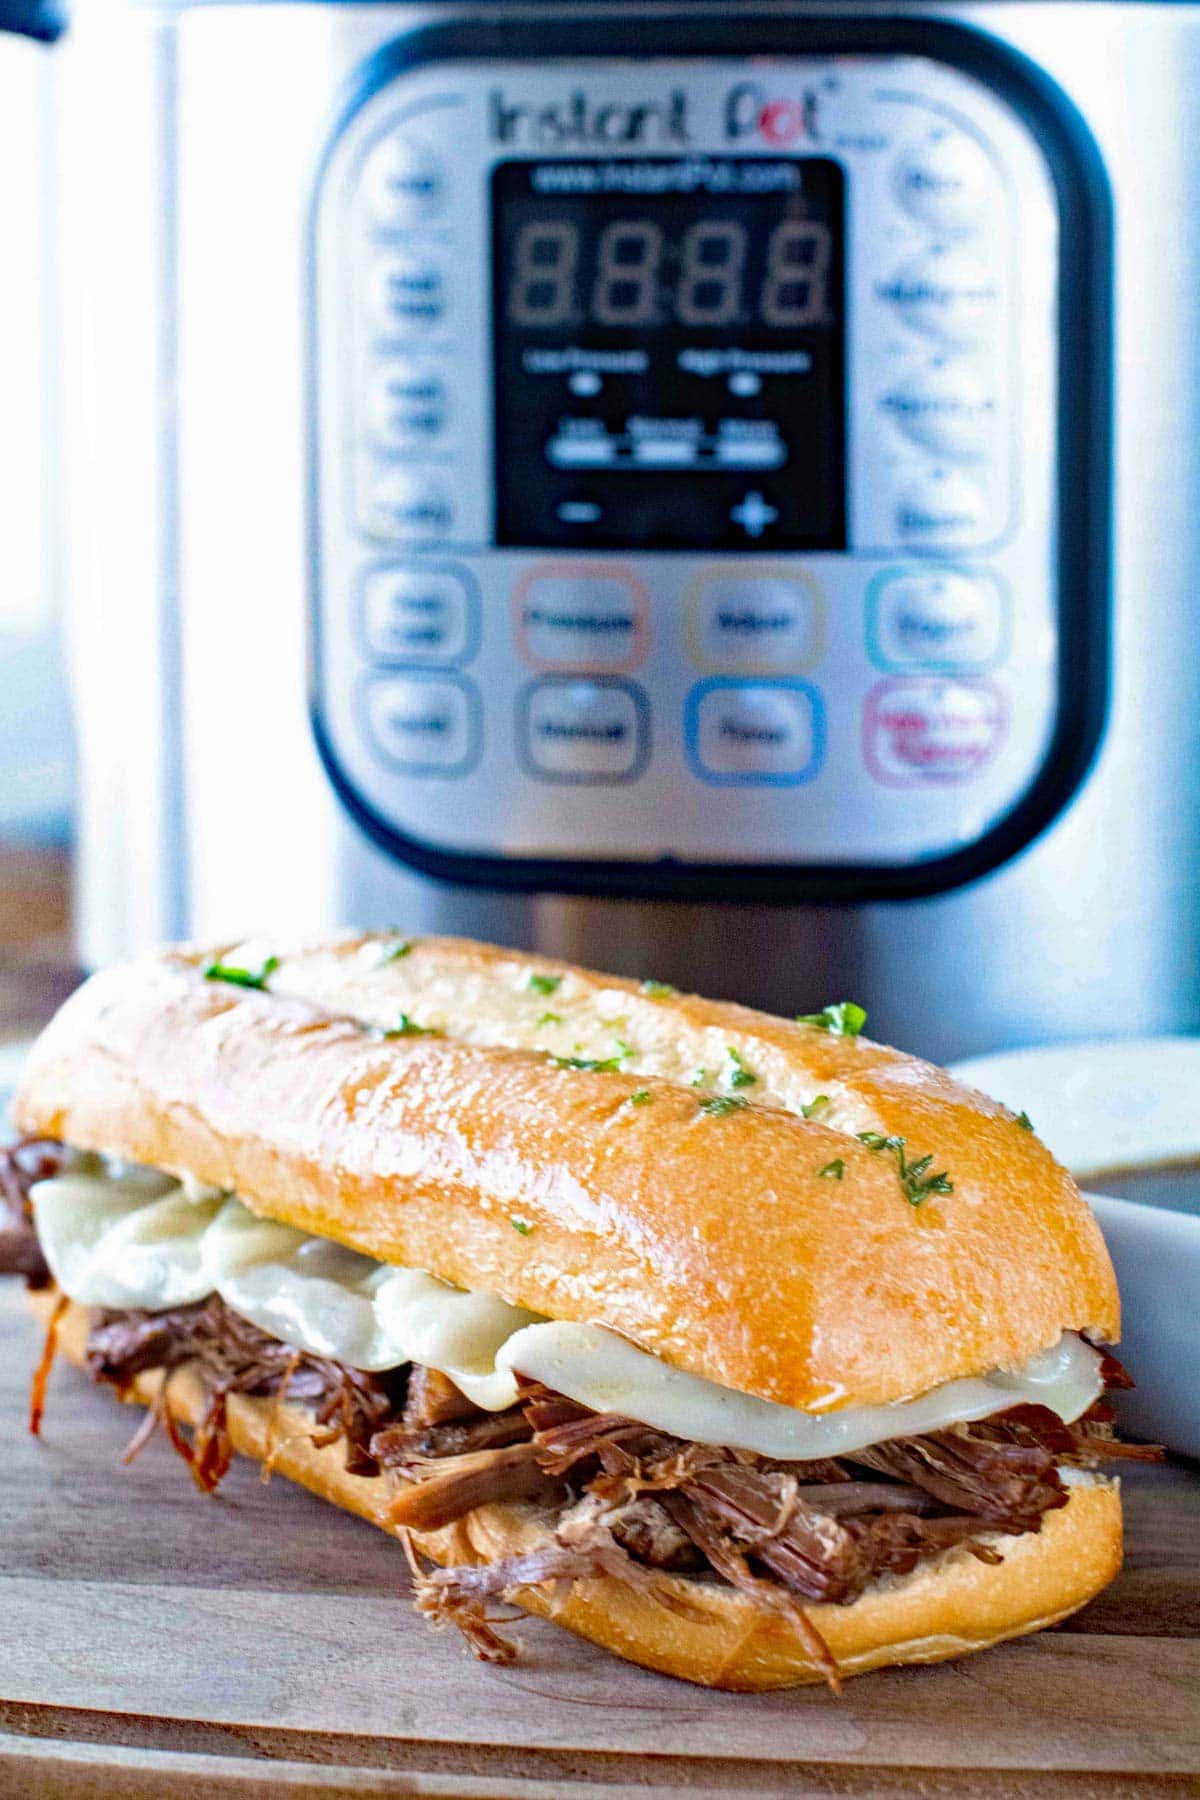 French Dip Sandwich in front of a Pressure Cooker